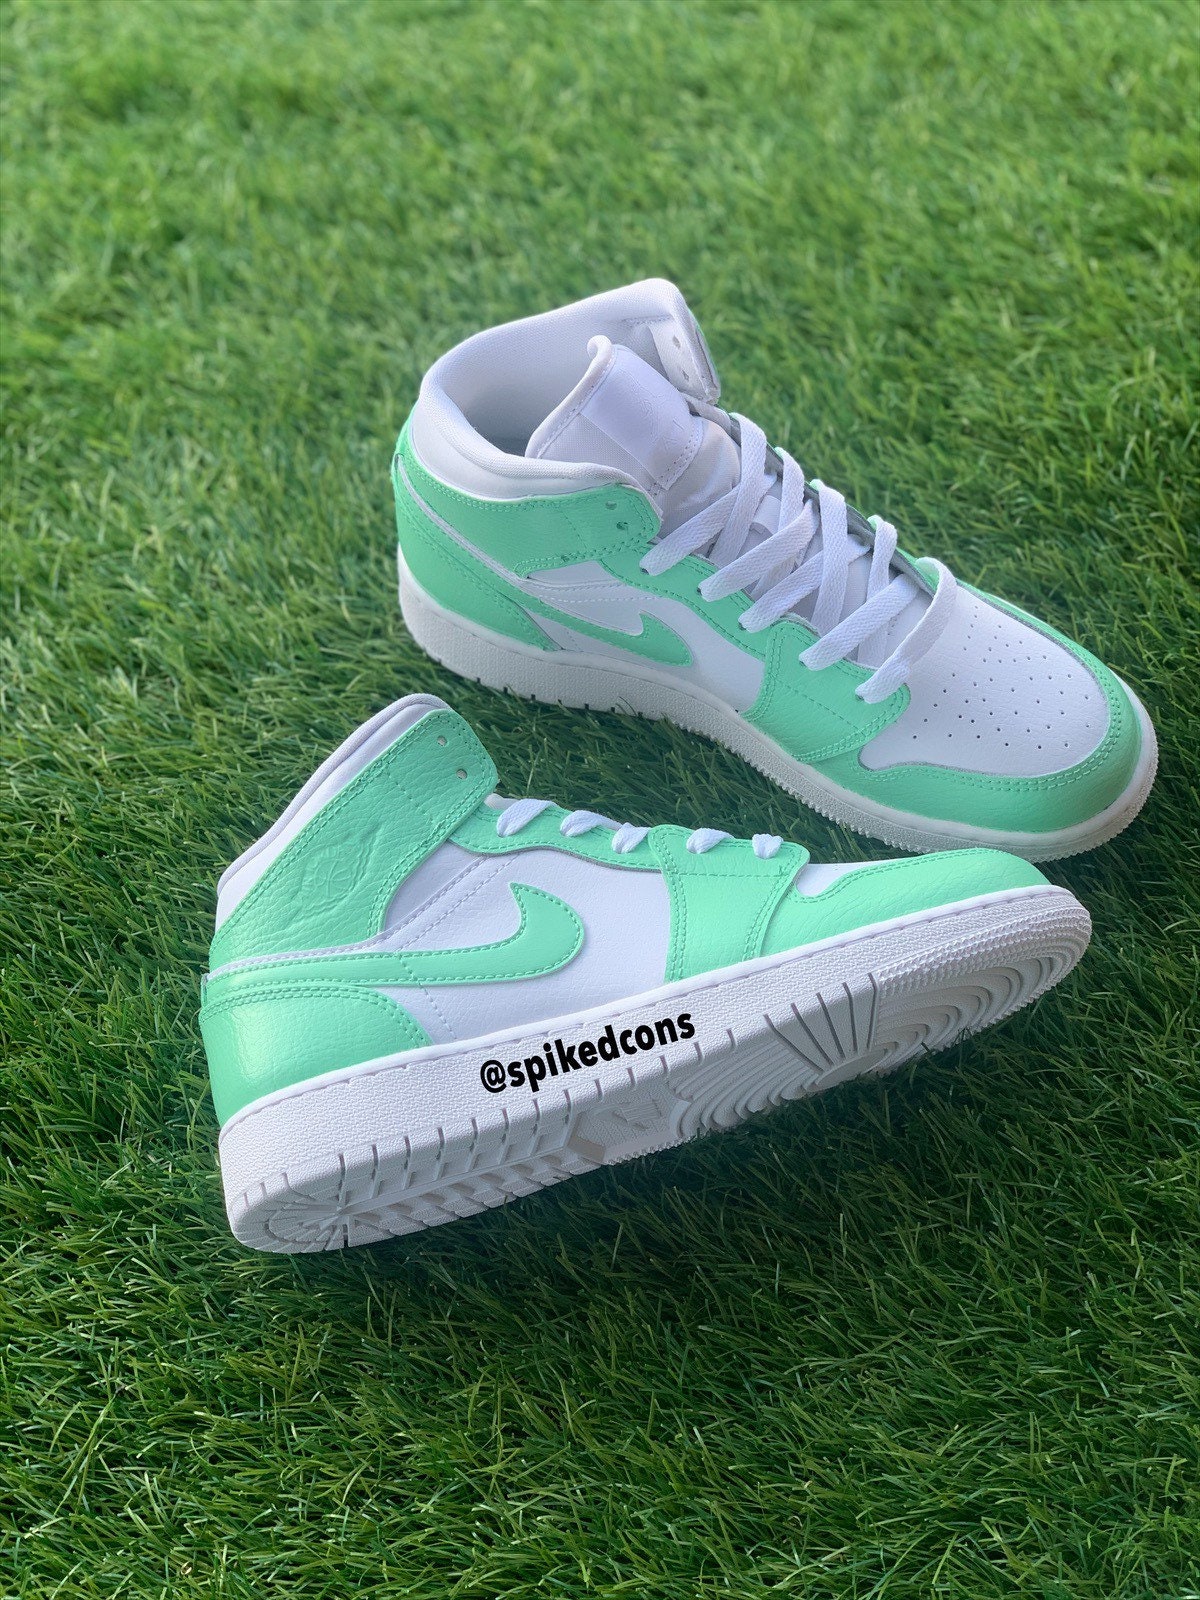 mint Green J 1 other Colors Availablecheck Sizing - Etsy